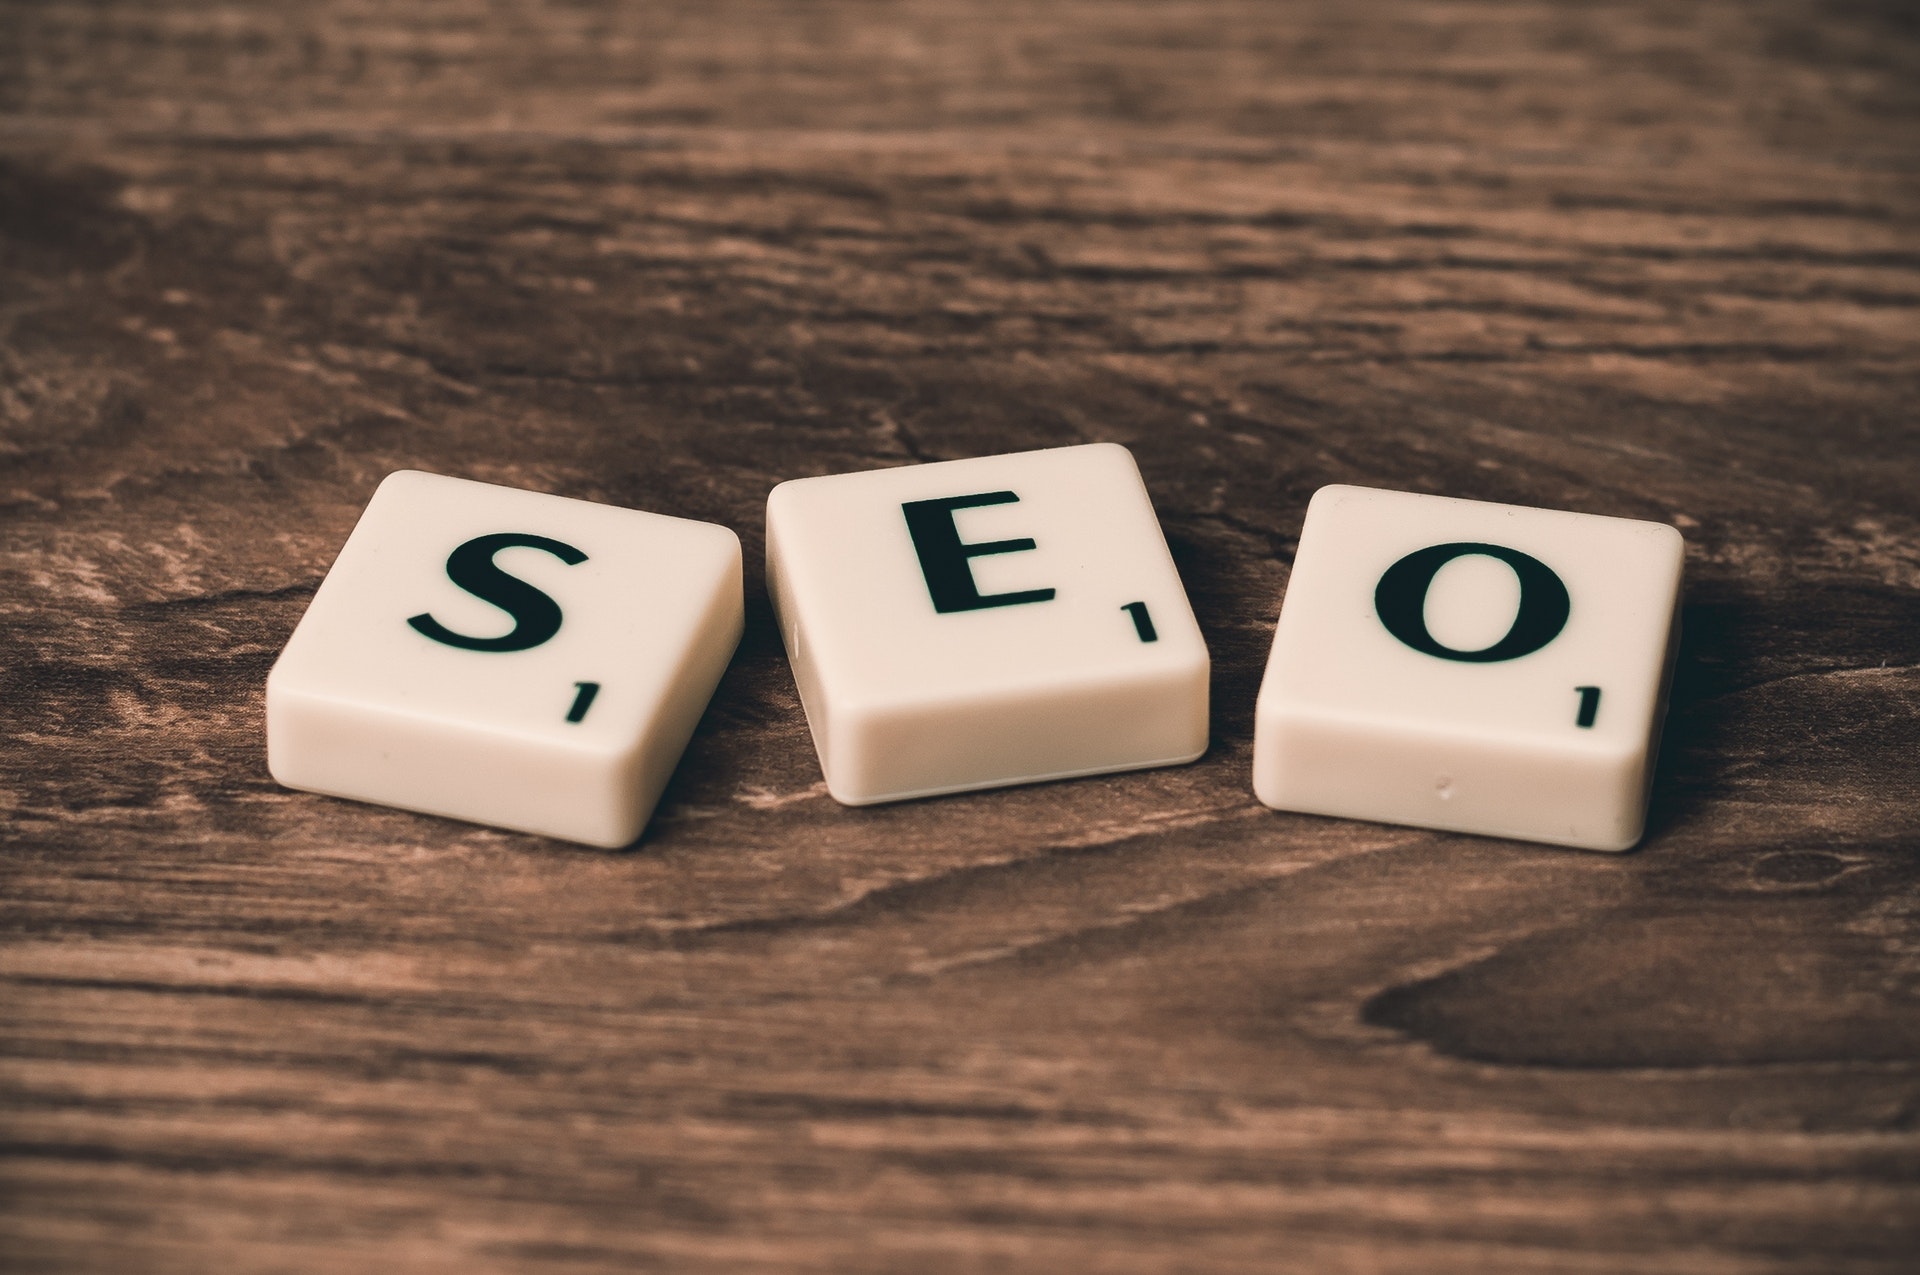 How to Avoid Easy & Honest SEO mistakes that could penalize your site?